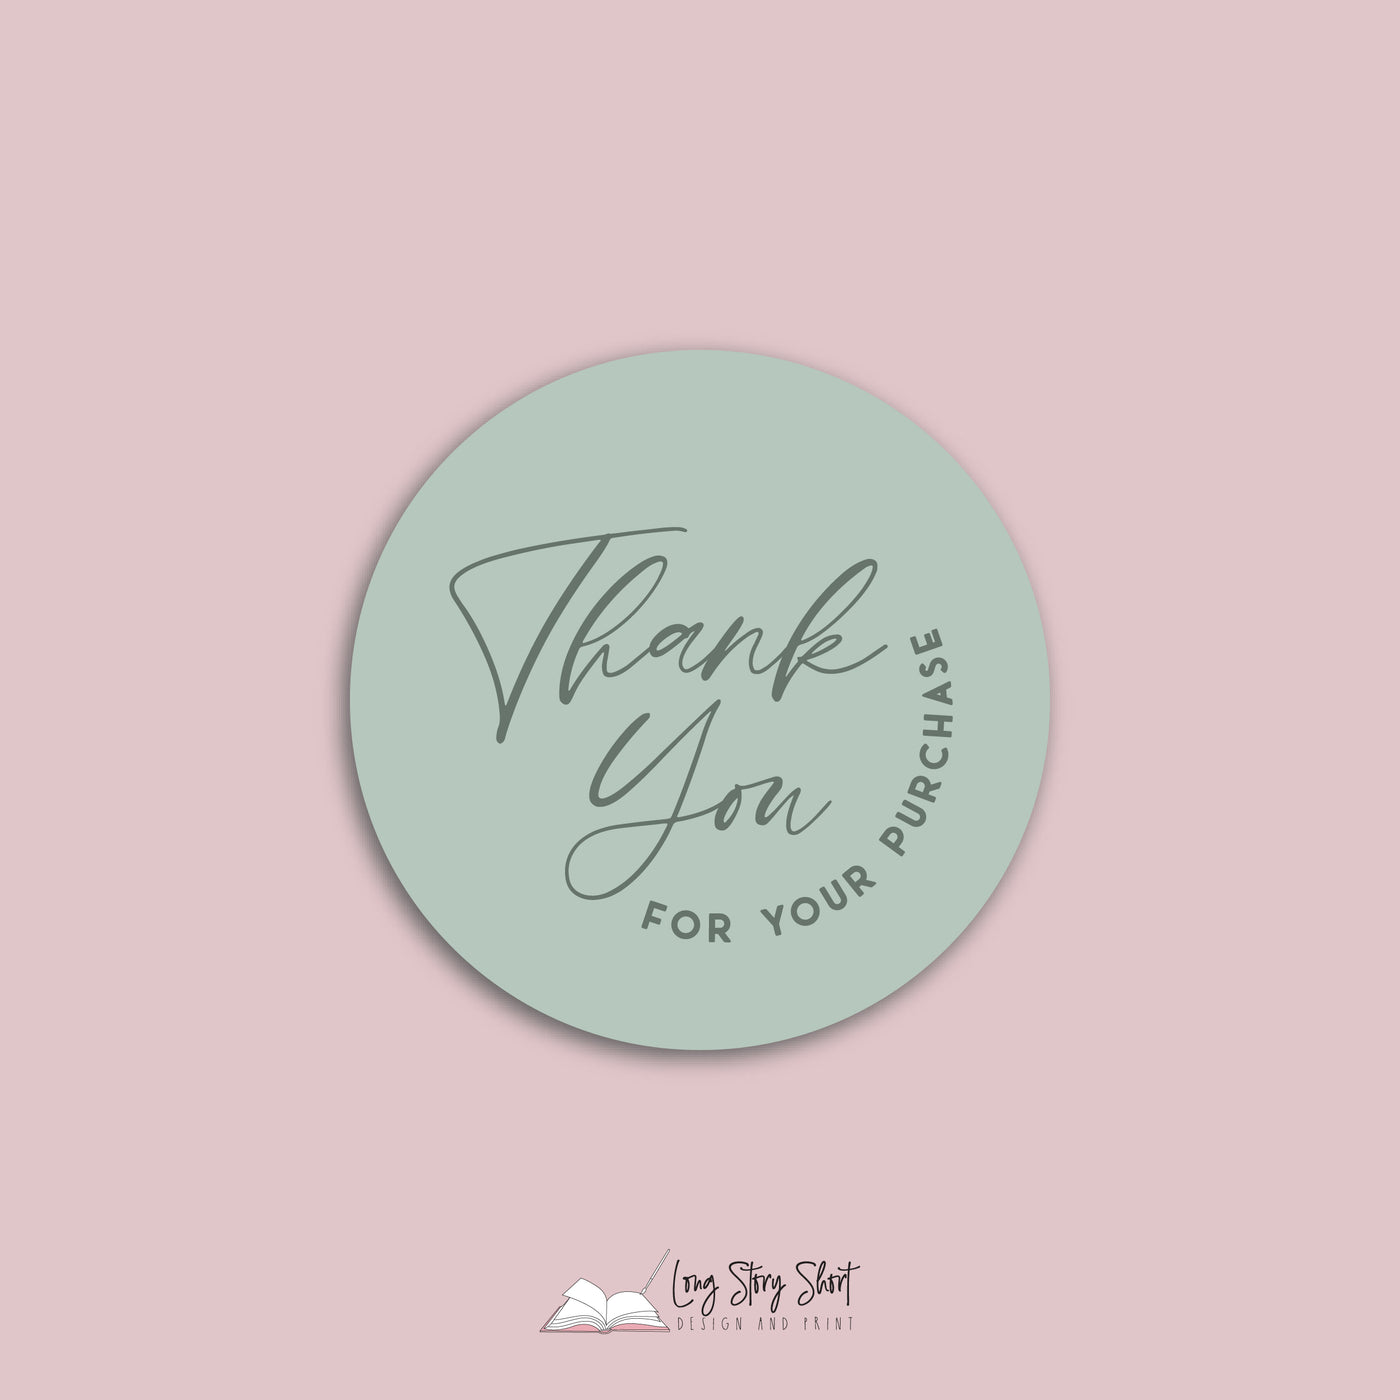 Thank you for your purchase Vinyl Label Pack